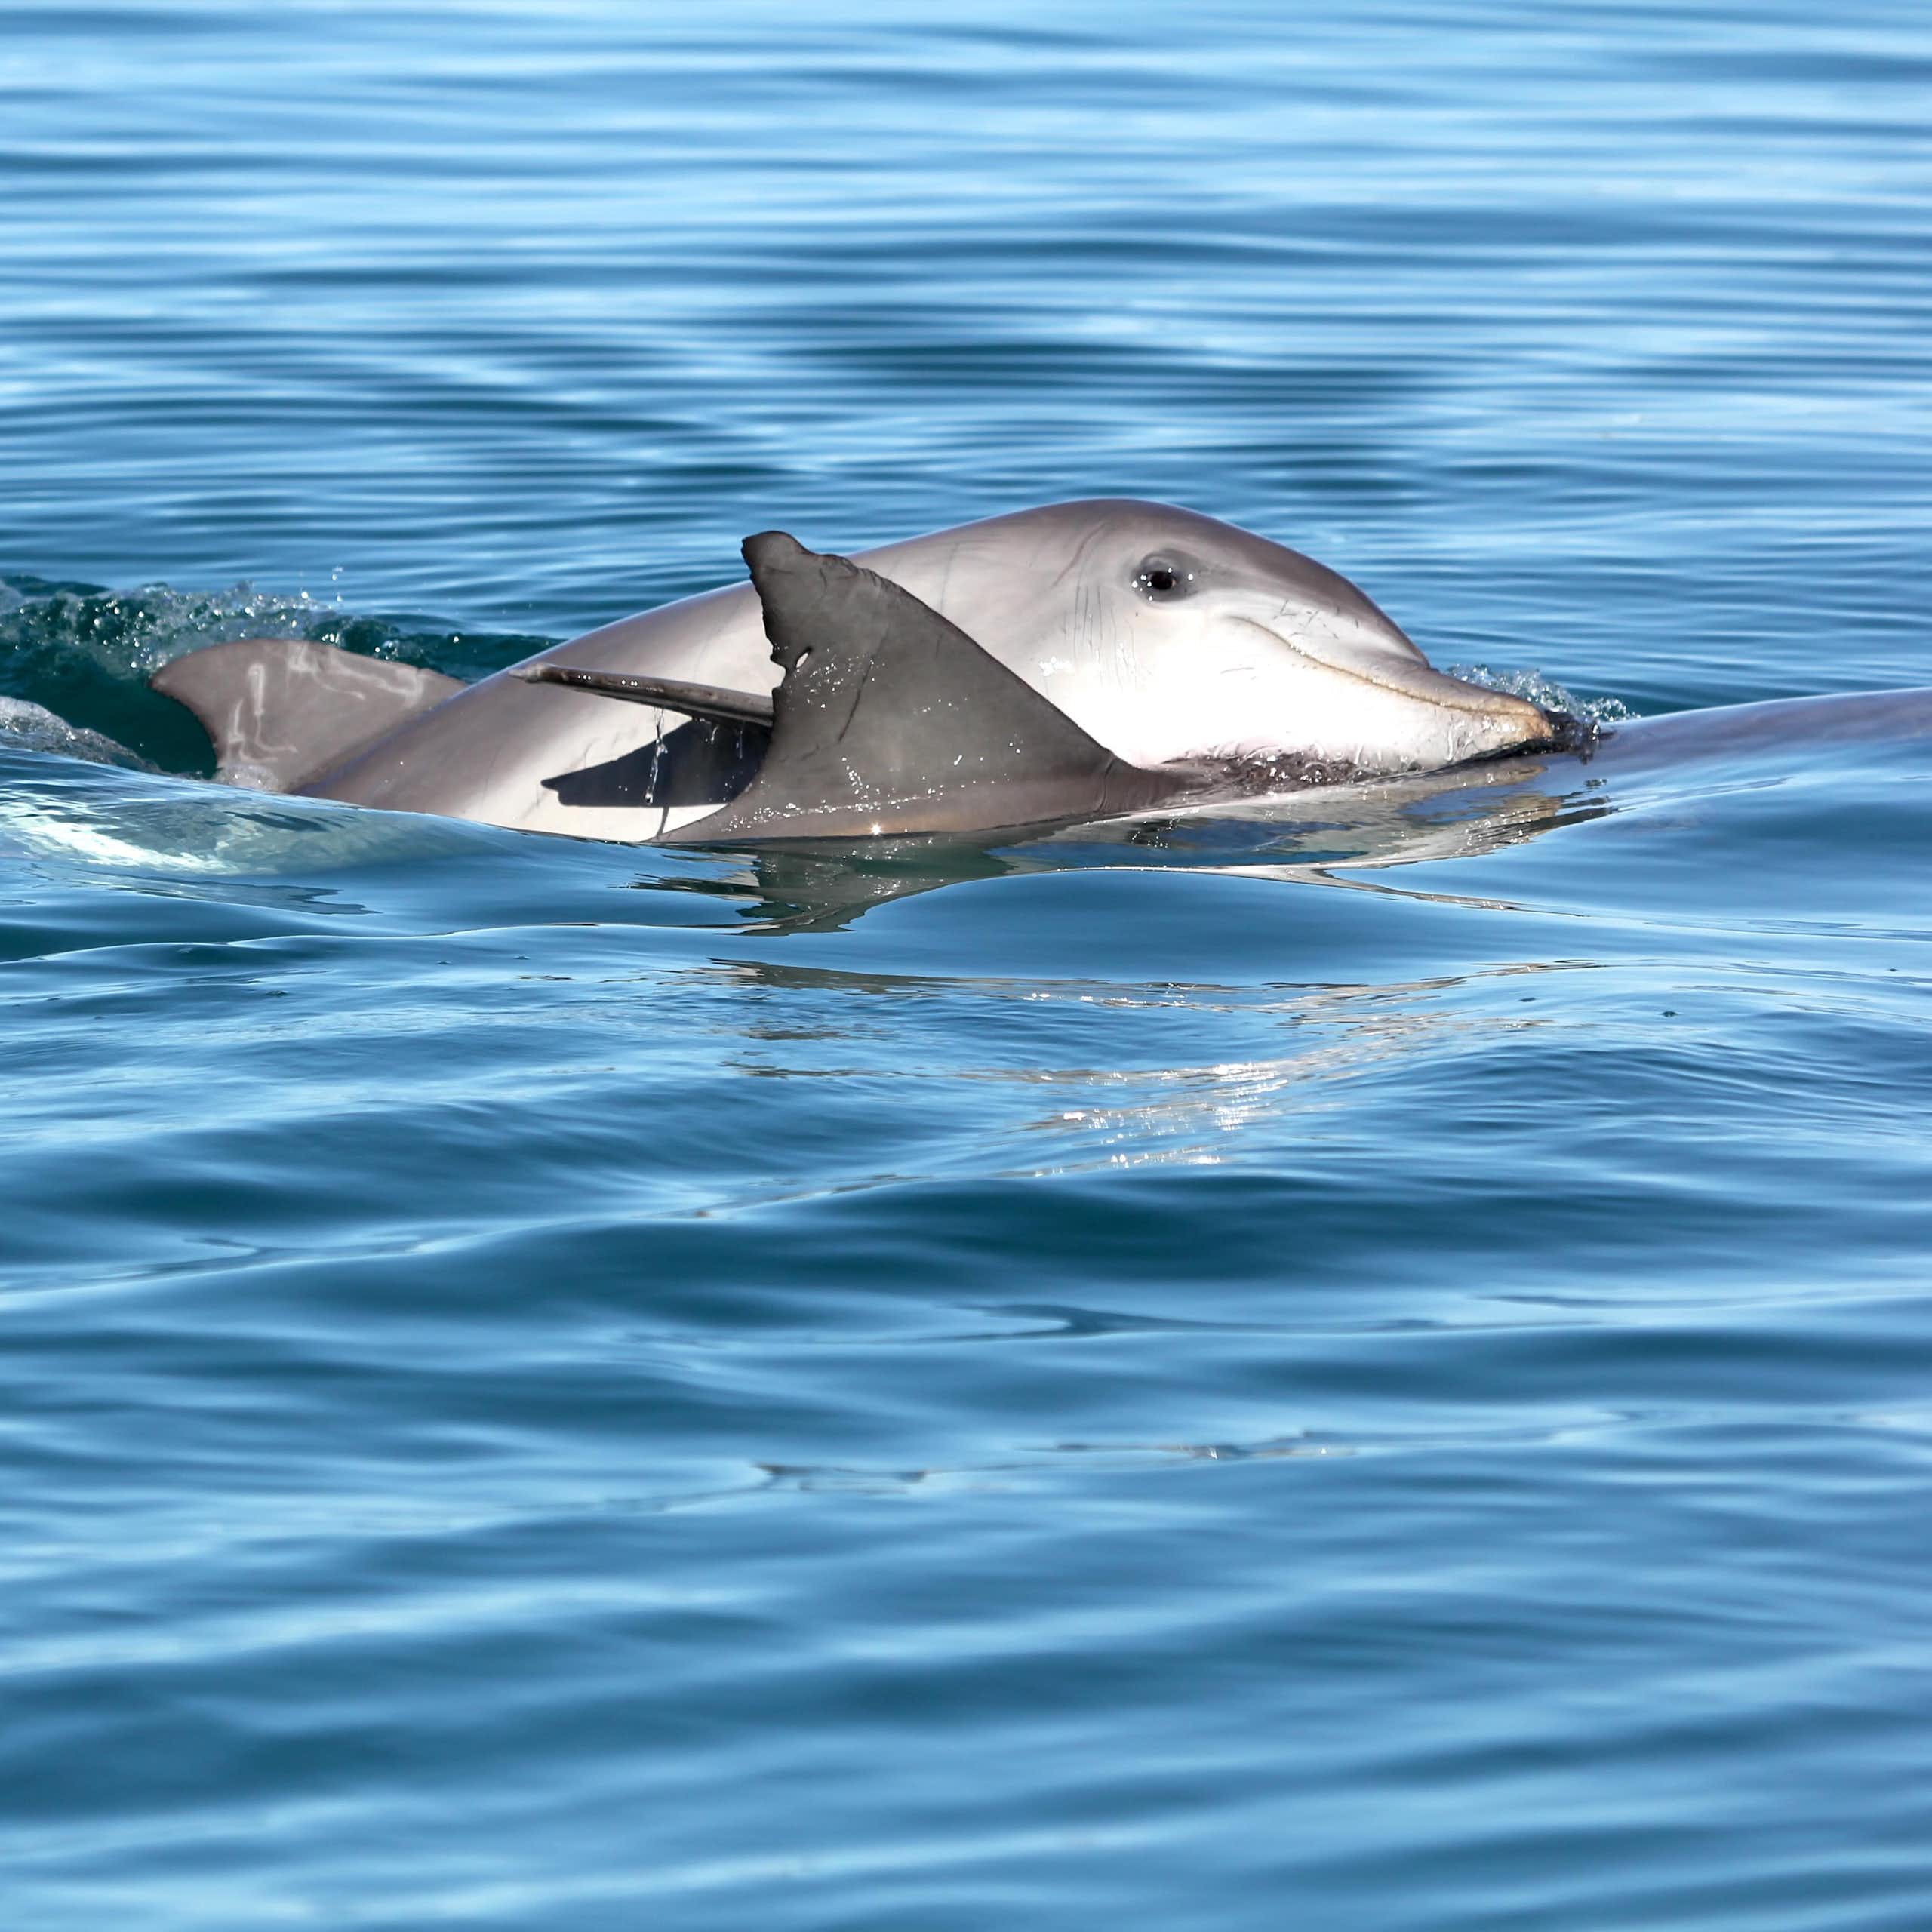 Photo showing two dolphins swimming together closely.